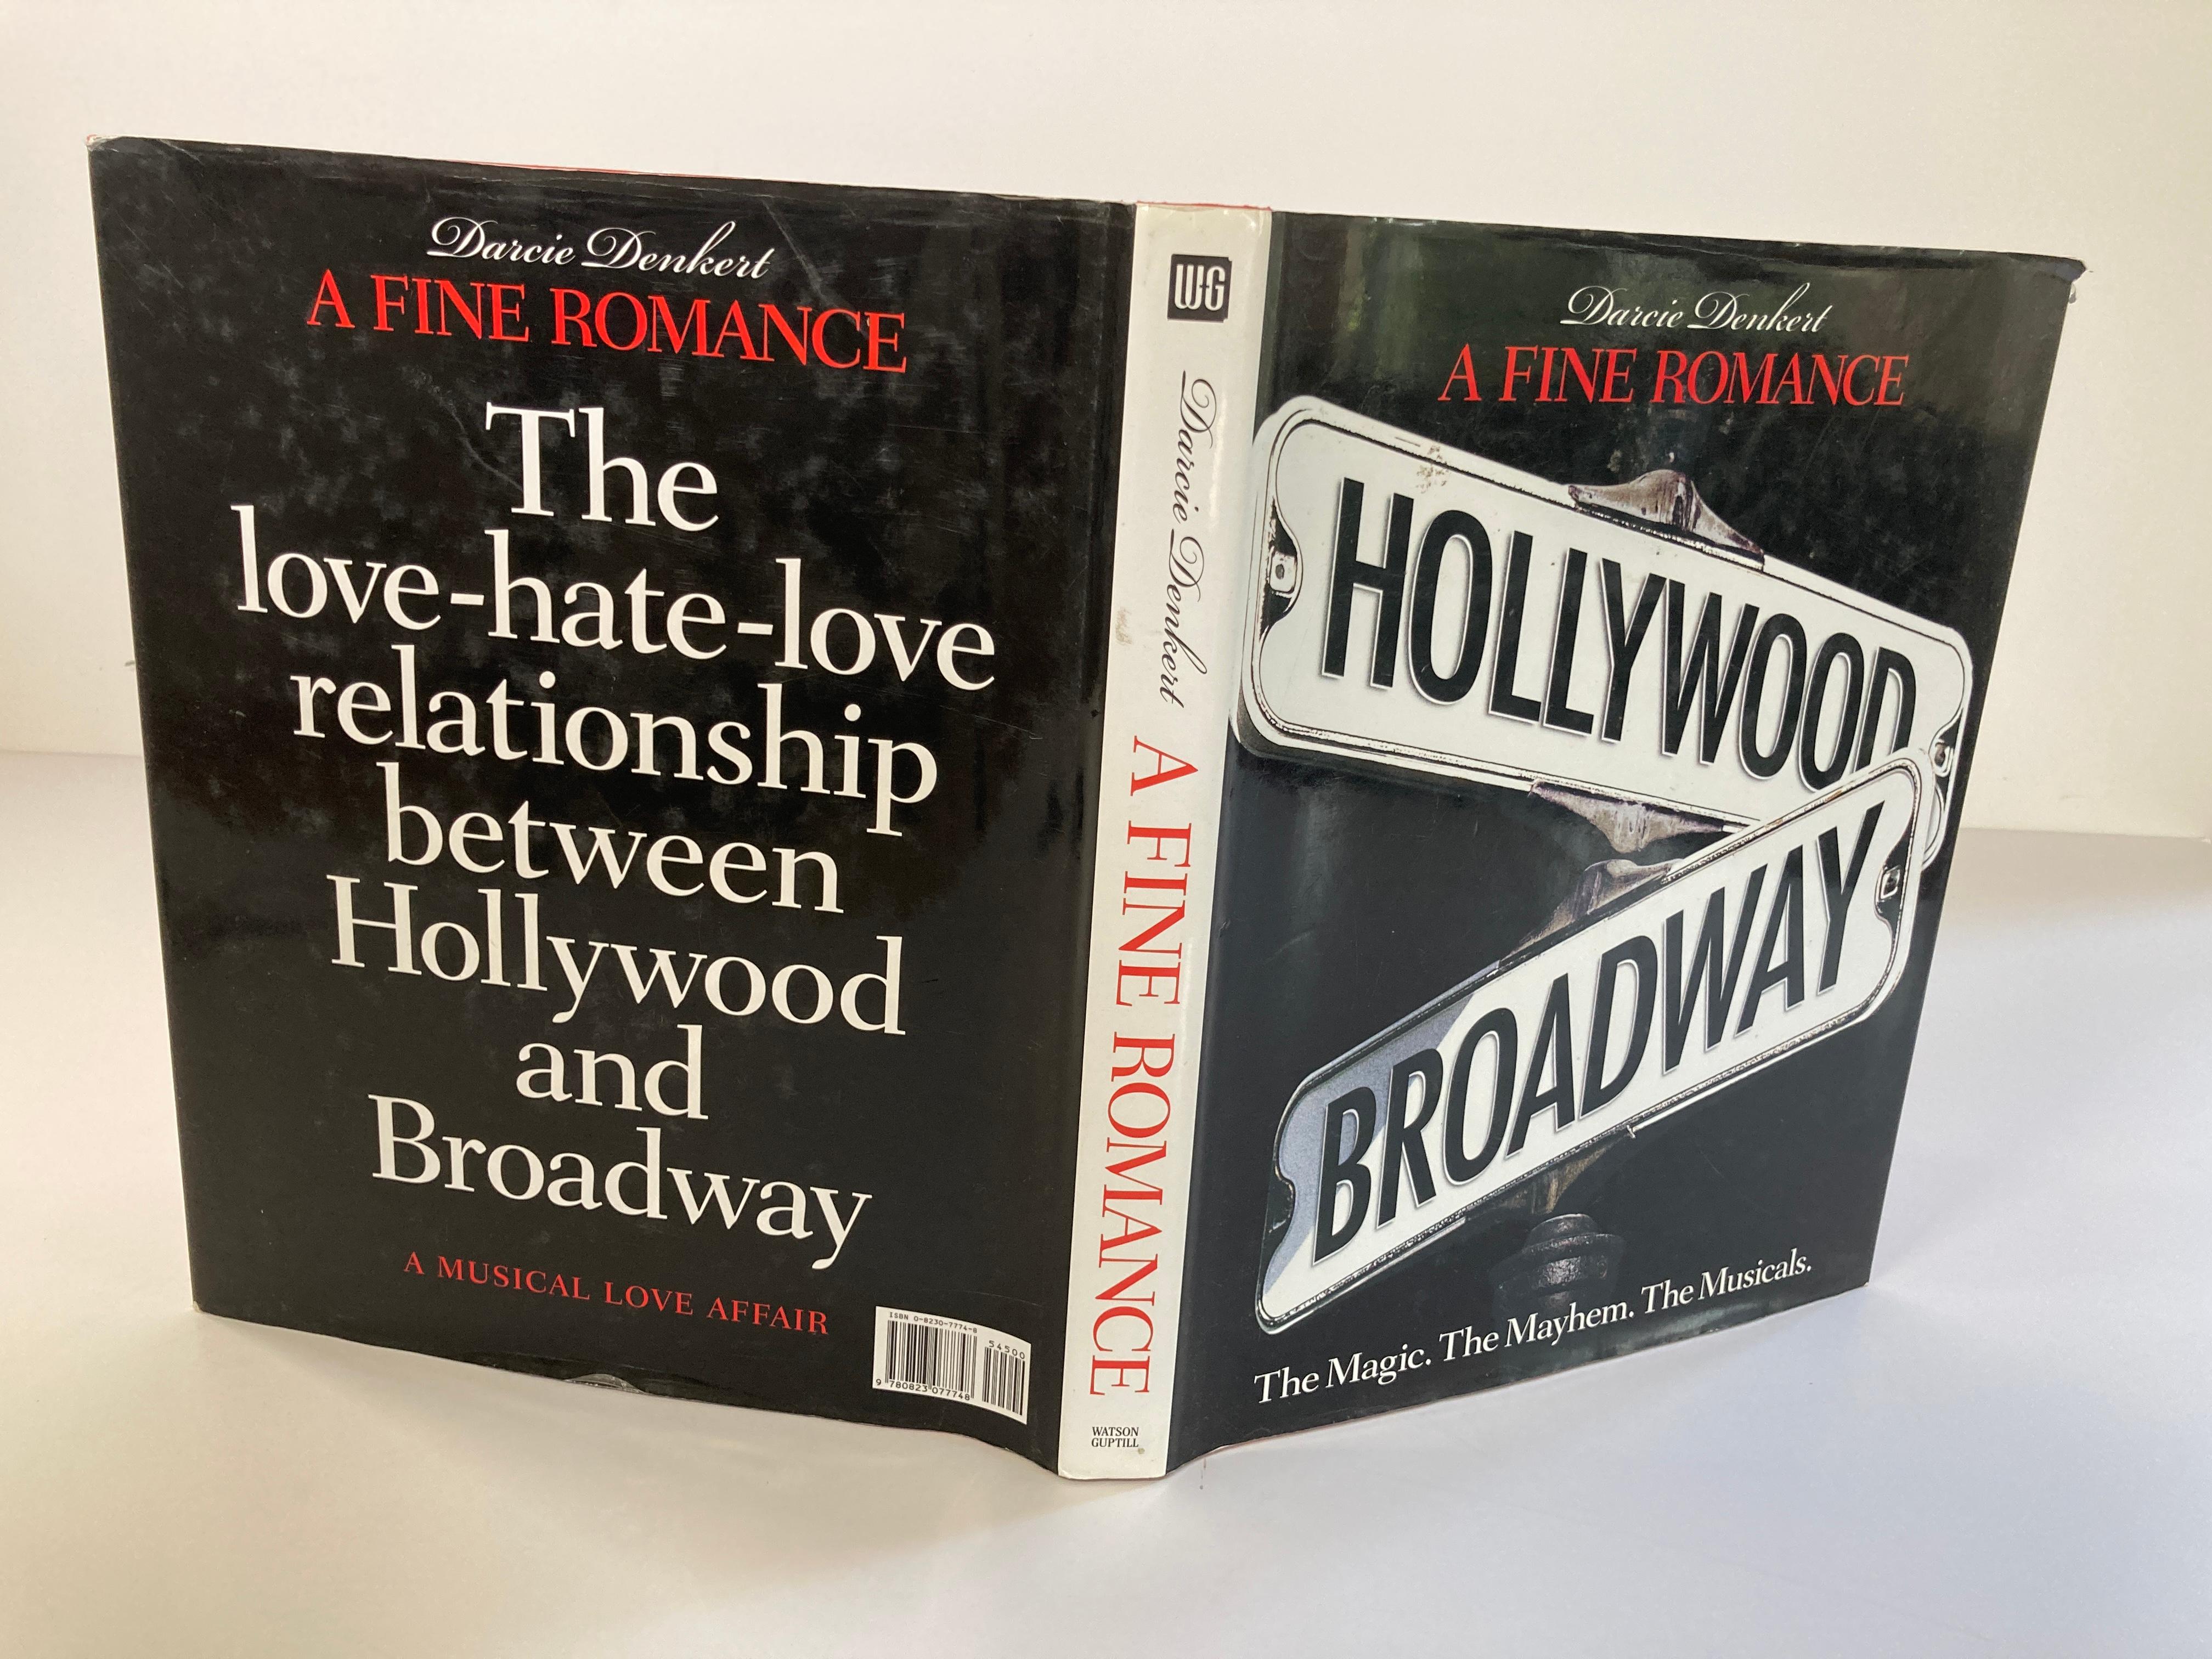 A Fine Romance Hollywood Broadway: The Magic, The Mayhem, The Musicians
By Denkert, Darcie.
New York: Watson-Guptill Publications, 2005. 360 pages.
Darcie covers the love/hate relationship between Hollywood and Broadway. Film, Musicals,